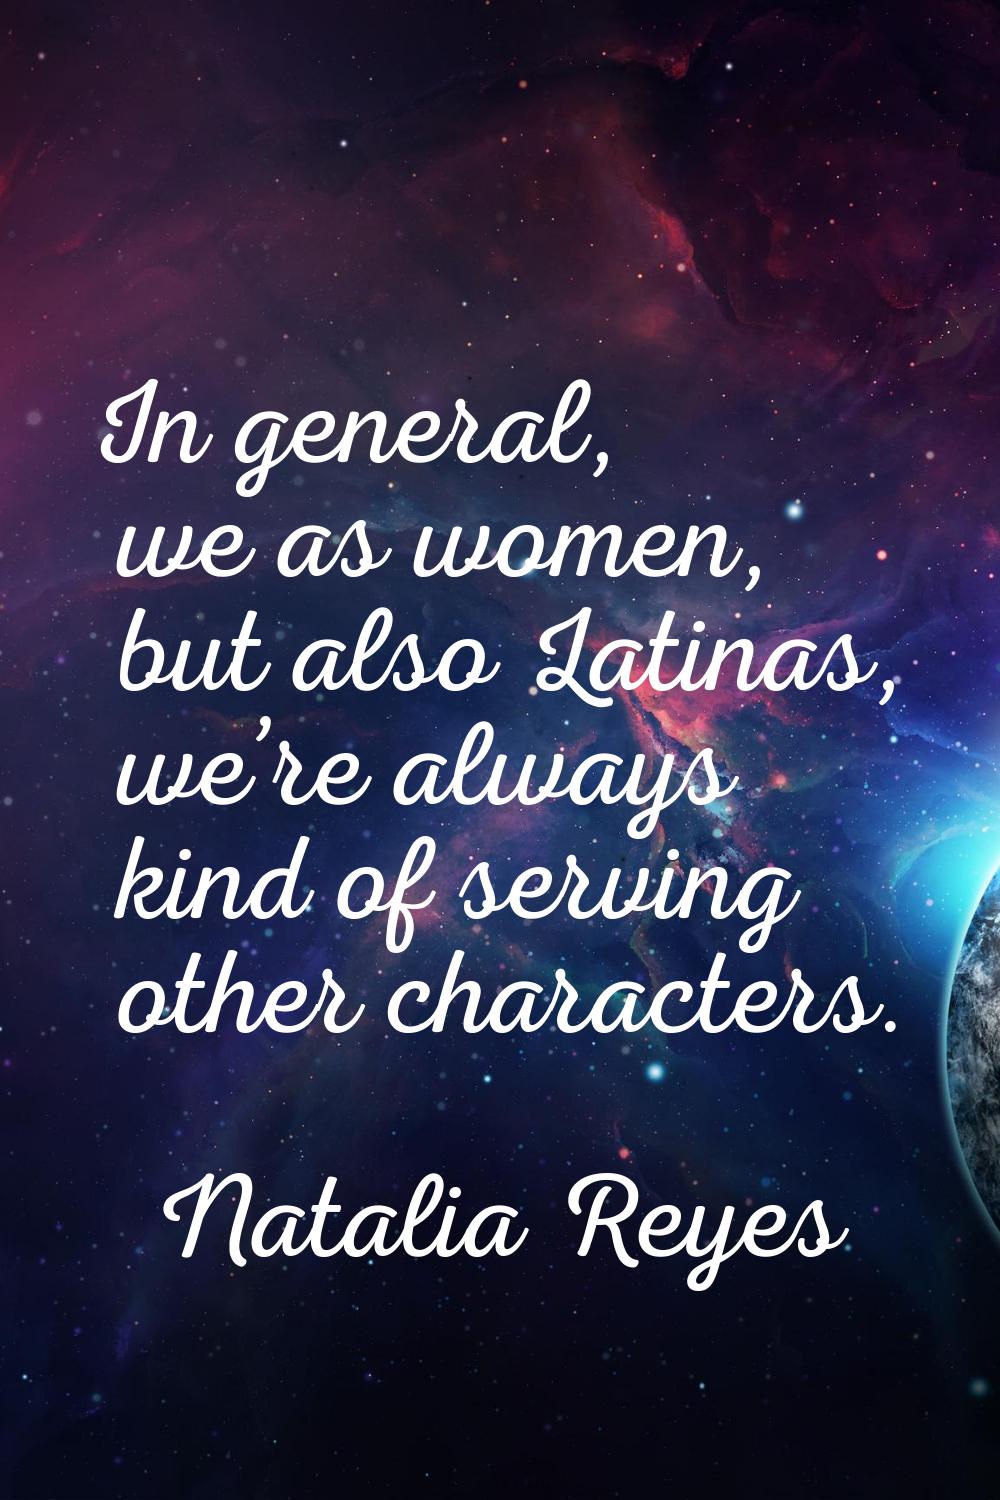 In general, we as women, but also Latinas, we’re always kind of serving other characters.